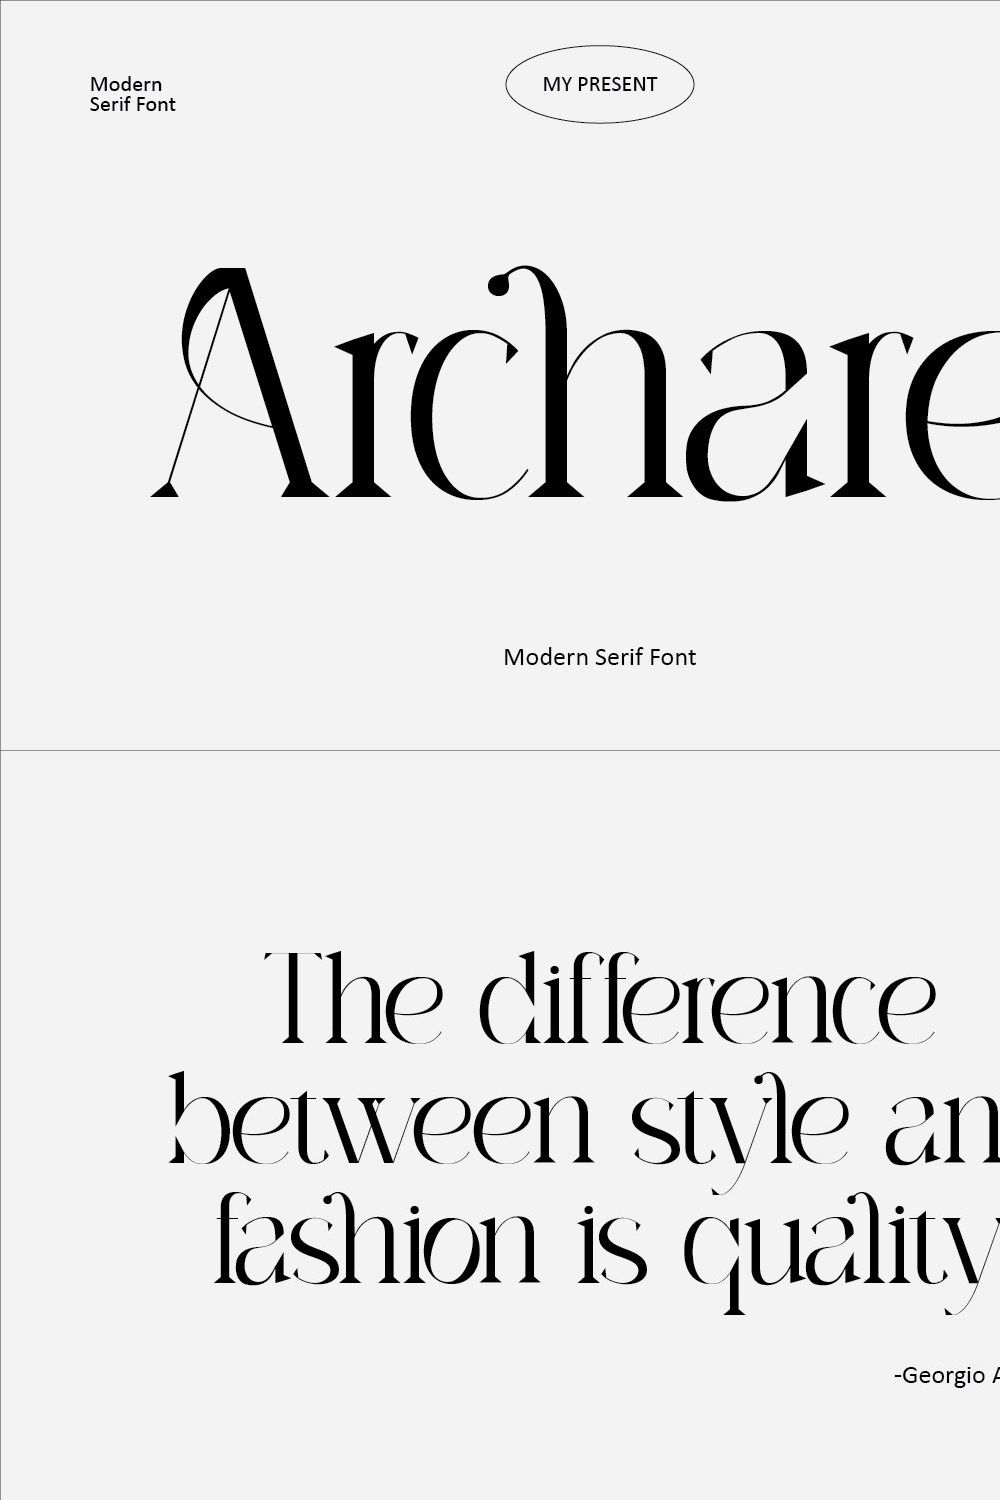 Archare pinterest preview image.